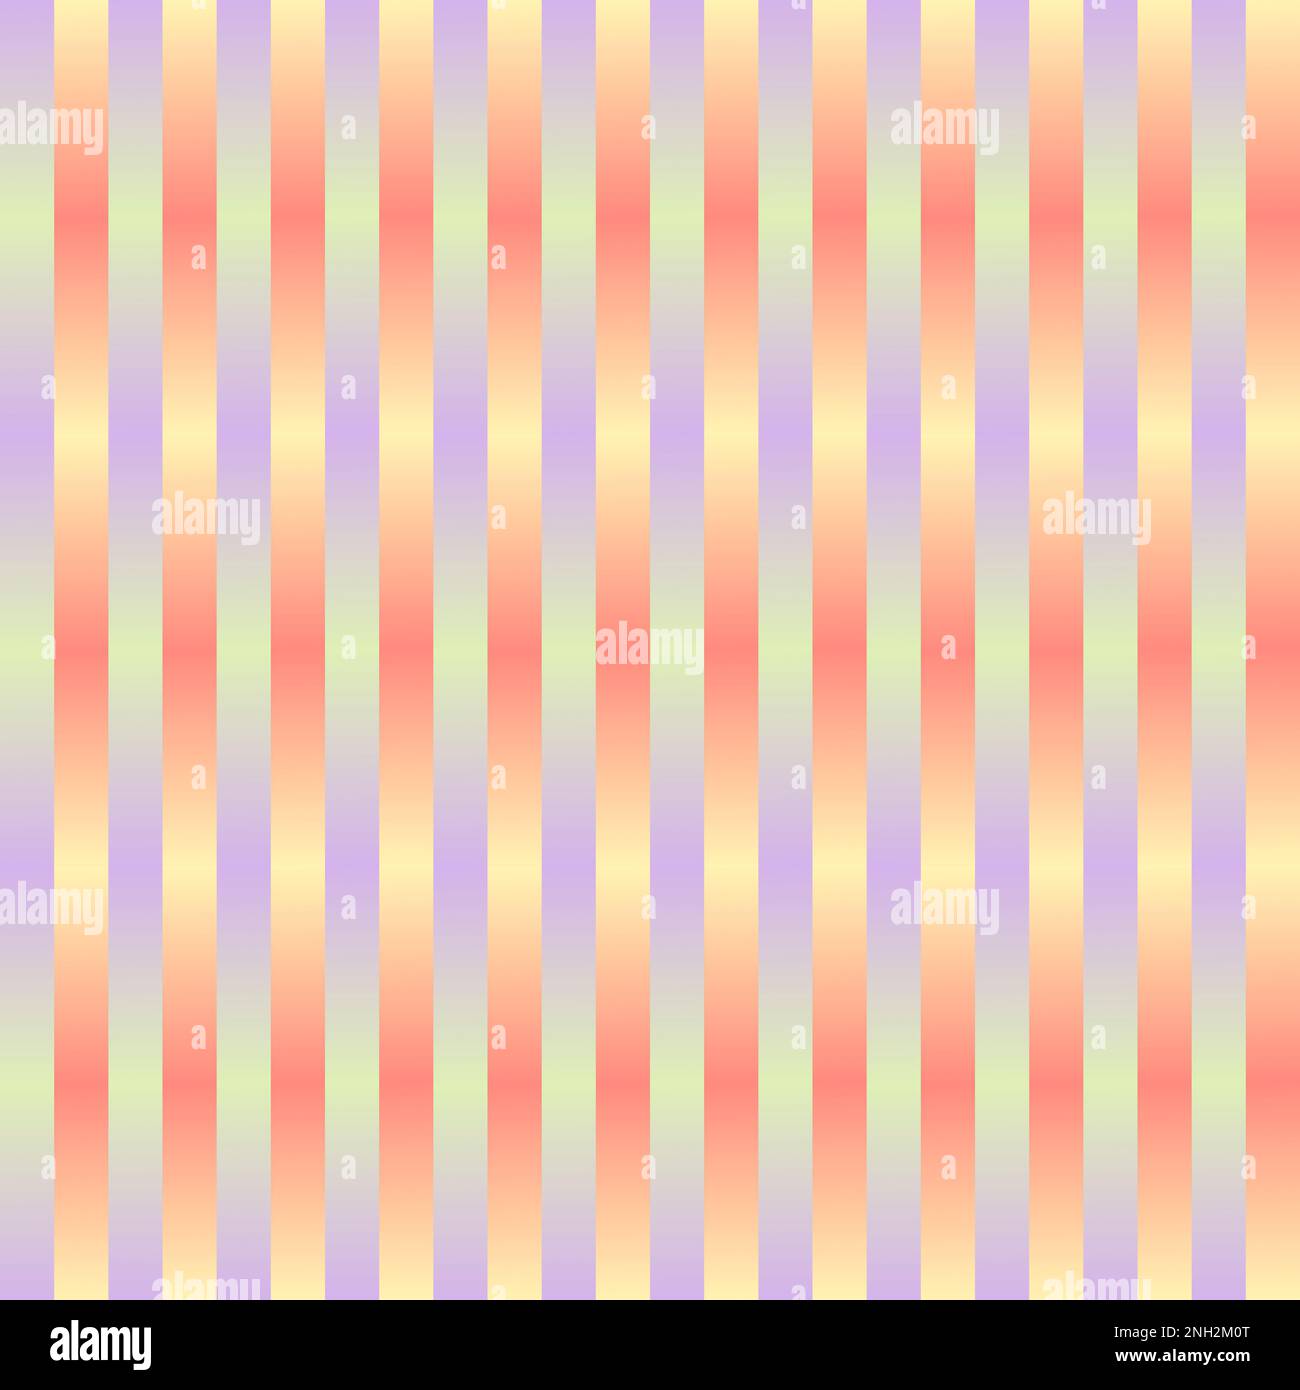 Vertical interwoven stripes seamlessly repeating wallpaper pattern Stock Photo